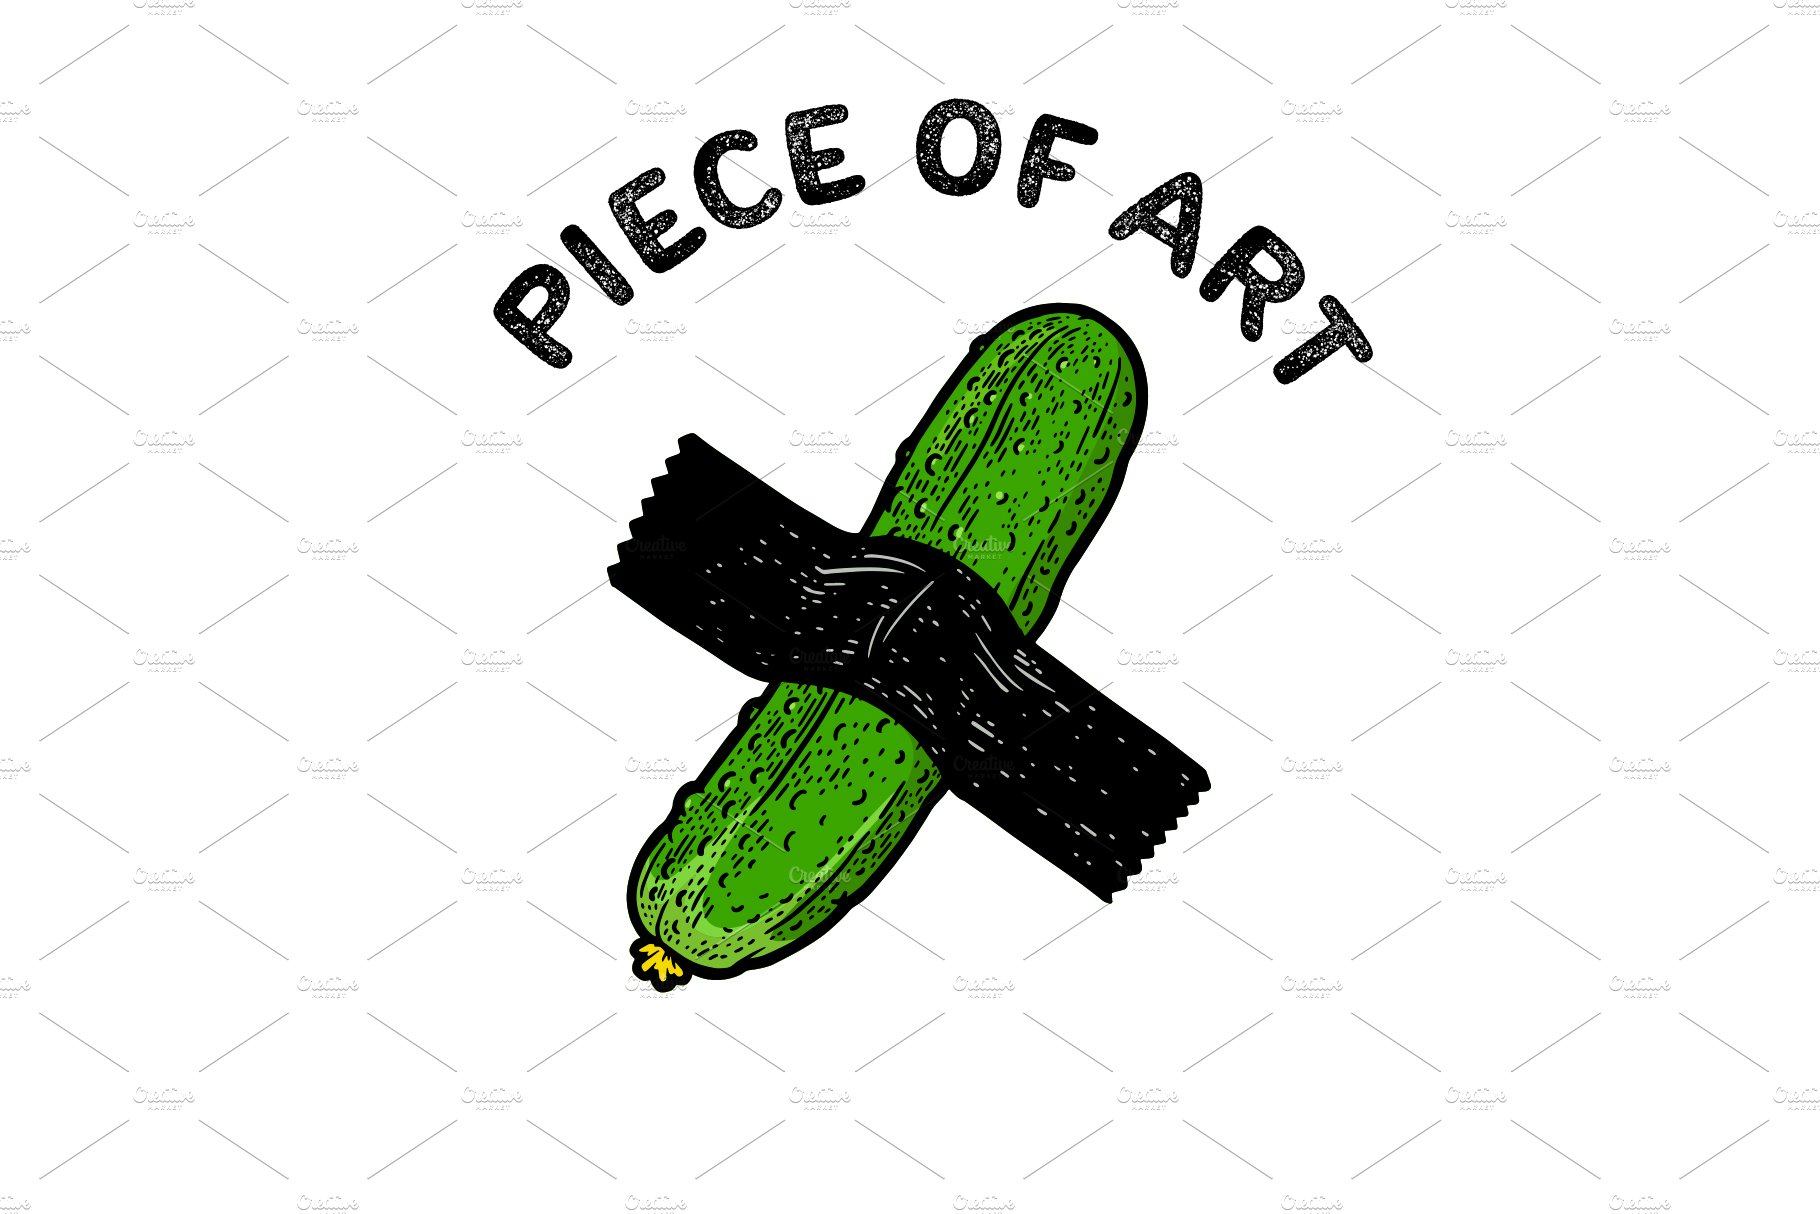 Piece of art design cucumber taped cover image.